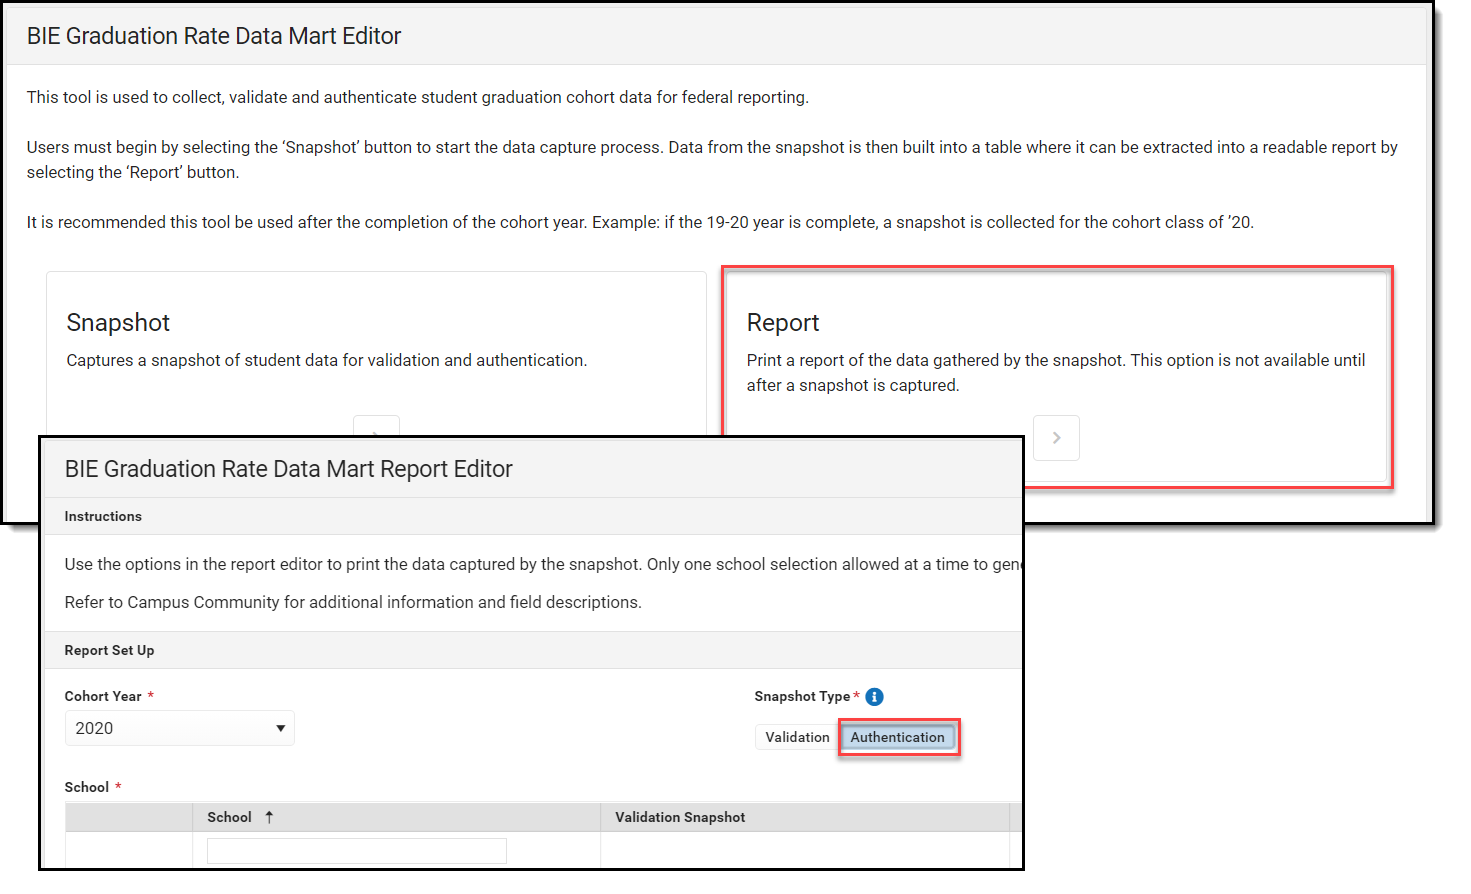 Screenshot of the Graduation Rate Data Mart Report Editor with Authentication type highlighted